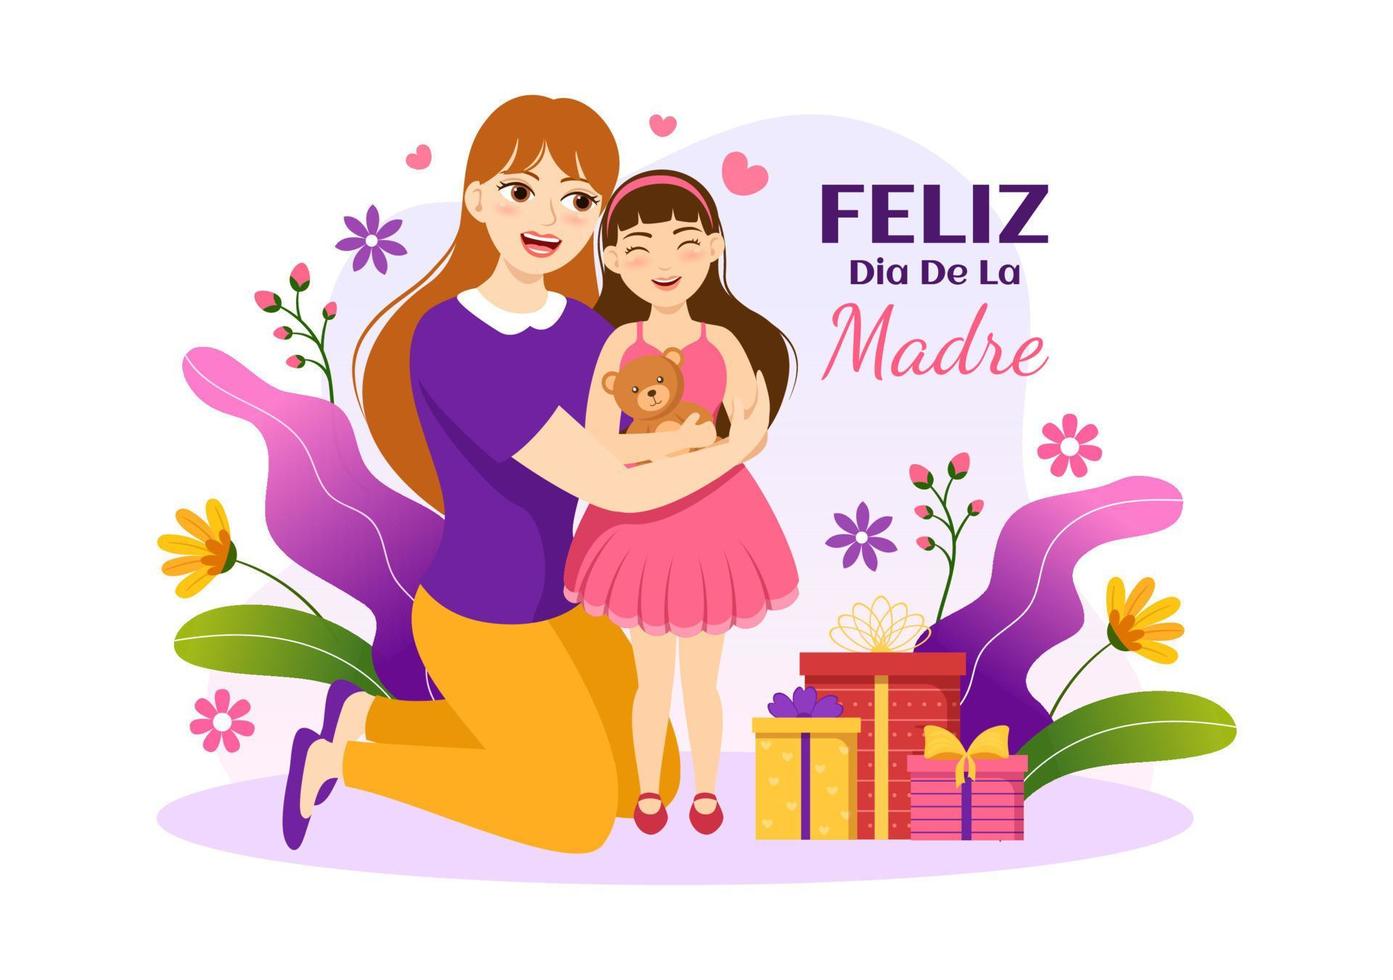 Feliz Dia De La Madre Illustration with Celebrating Happy Mother Day and Cute Kids in Flat Cartoon Hand Drawn for Web Banner or Landing Page Templates vector